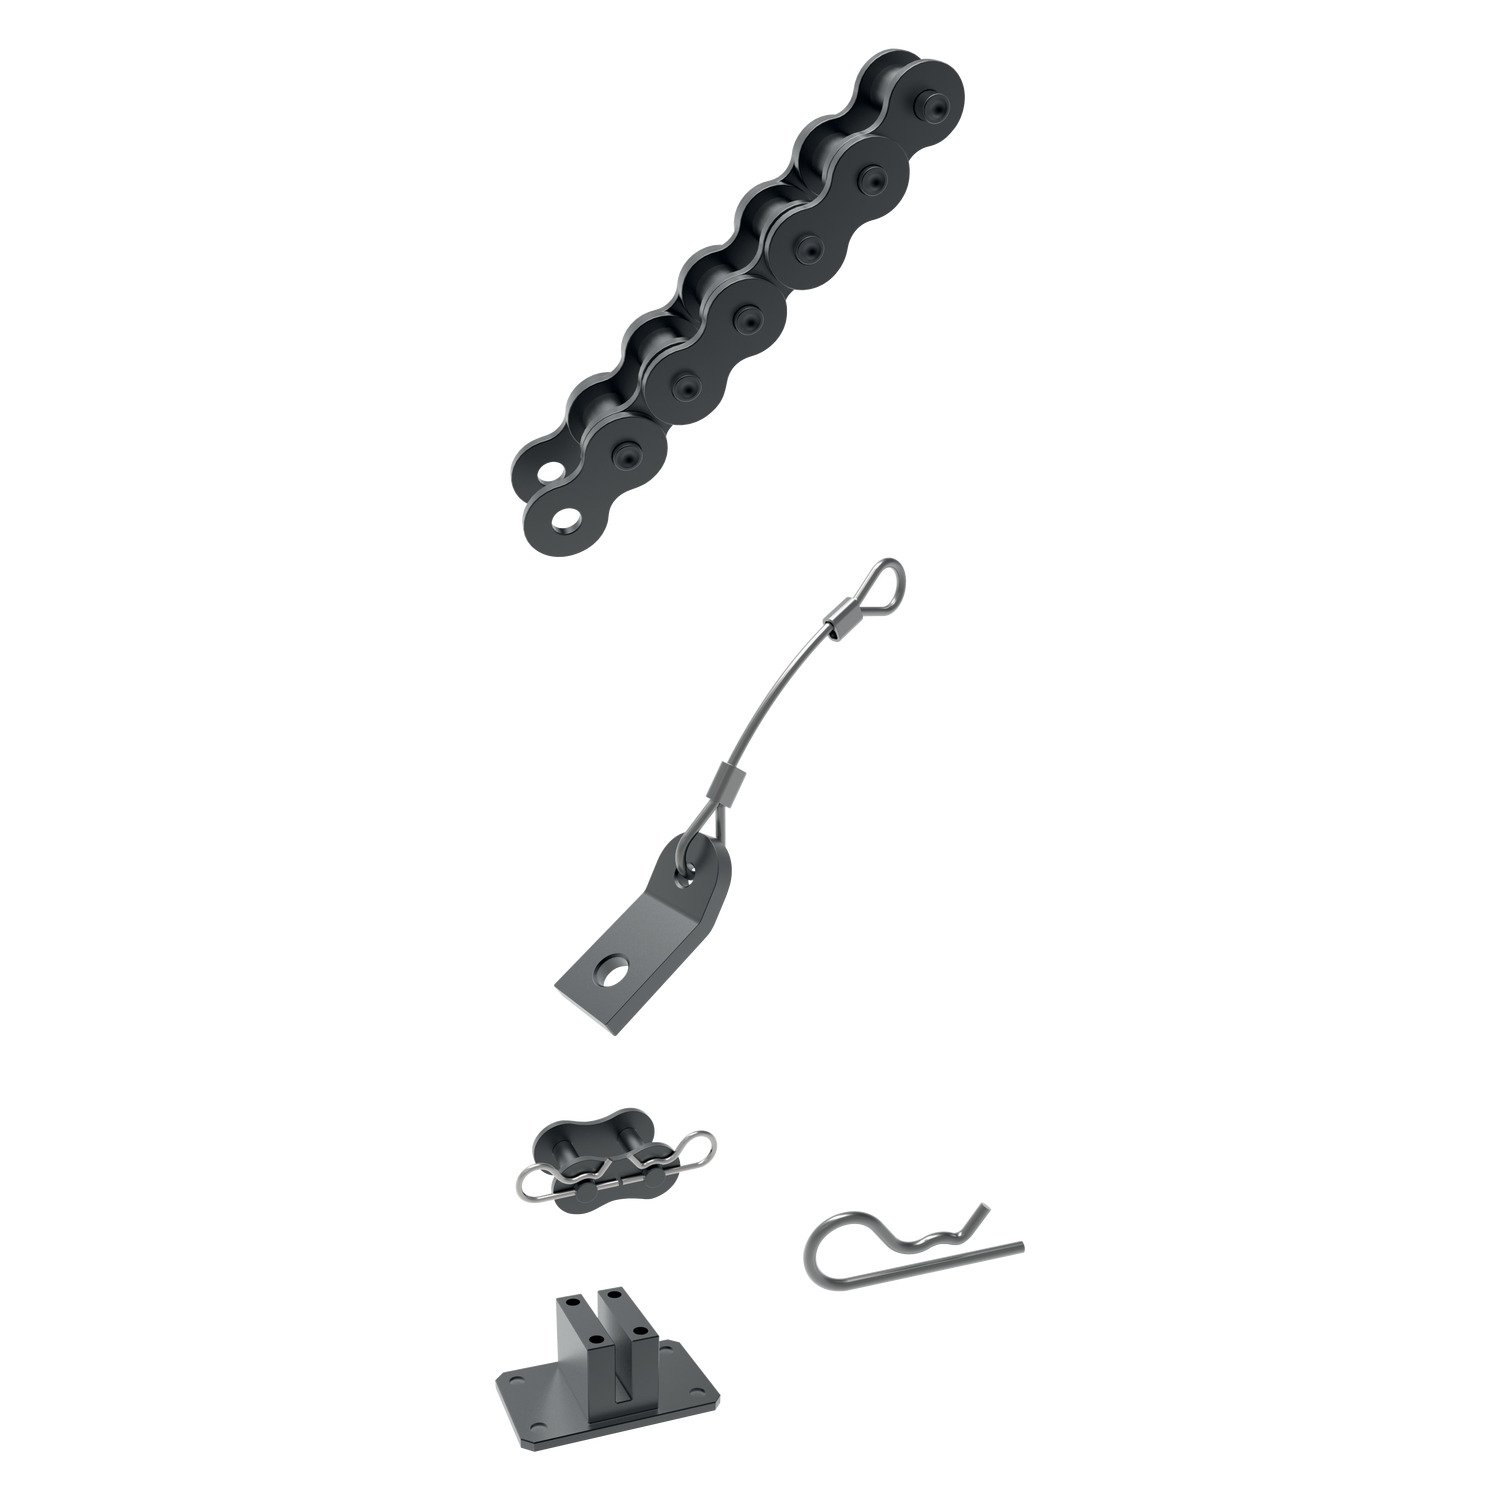 Product 12705, Chain Clamp Accessories for chain clamping set 12700 / 